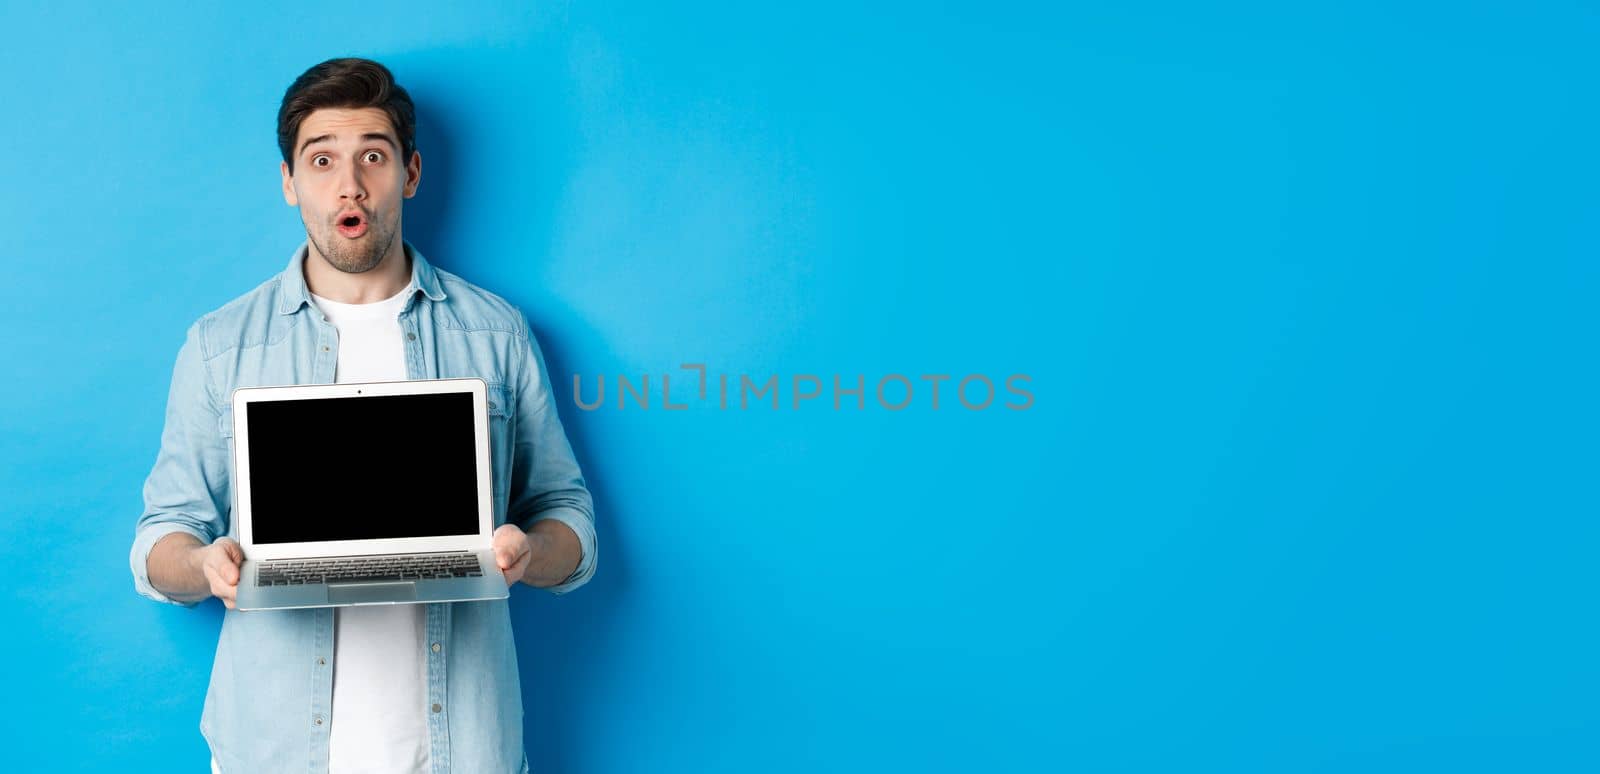 Man showing advertisement on laptop screen and looking amazed, saying wow and looking at camera, standing against blue background.